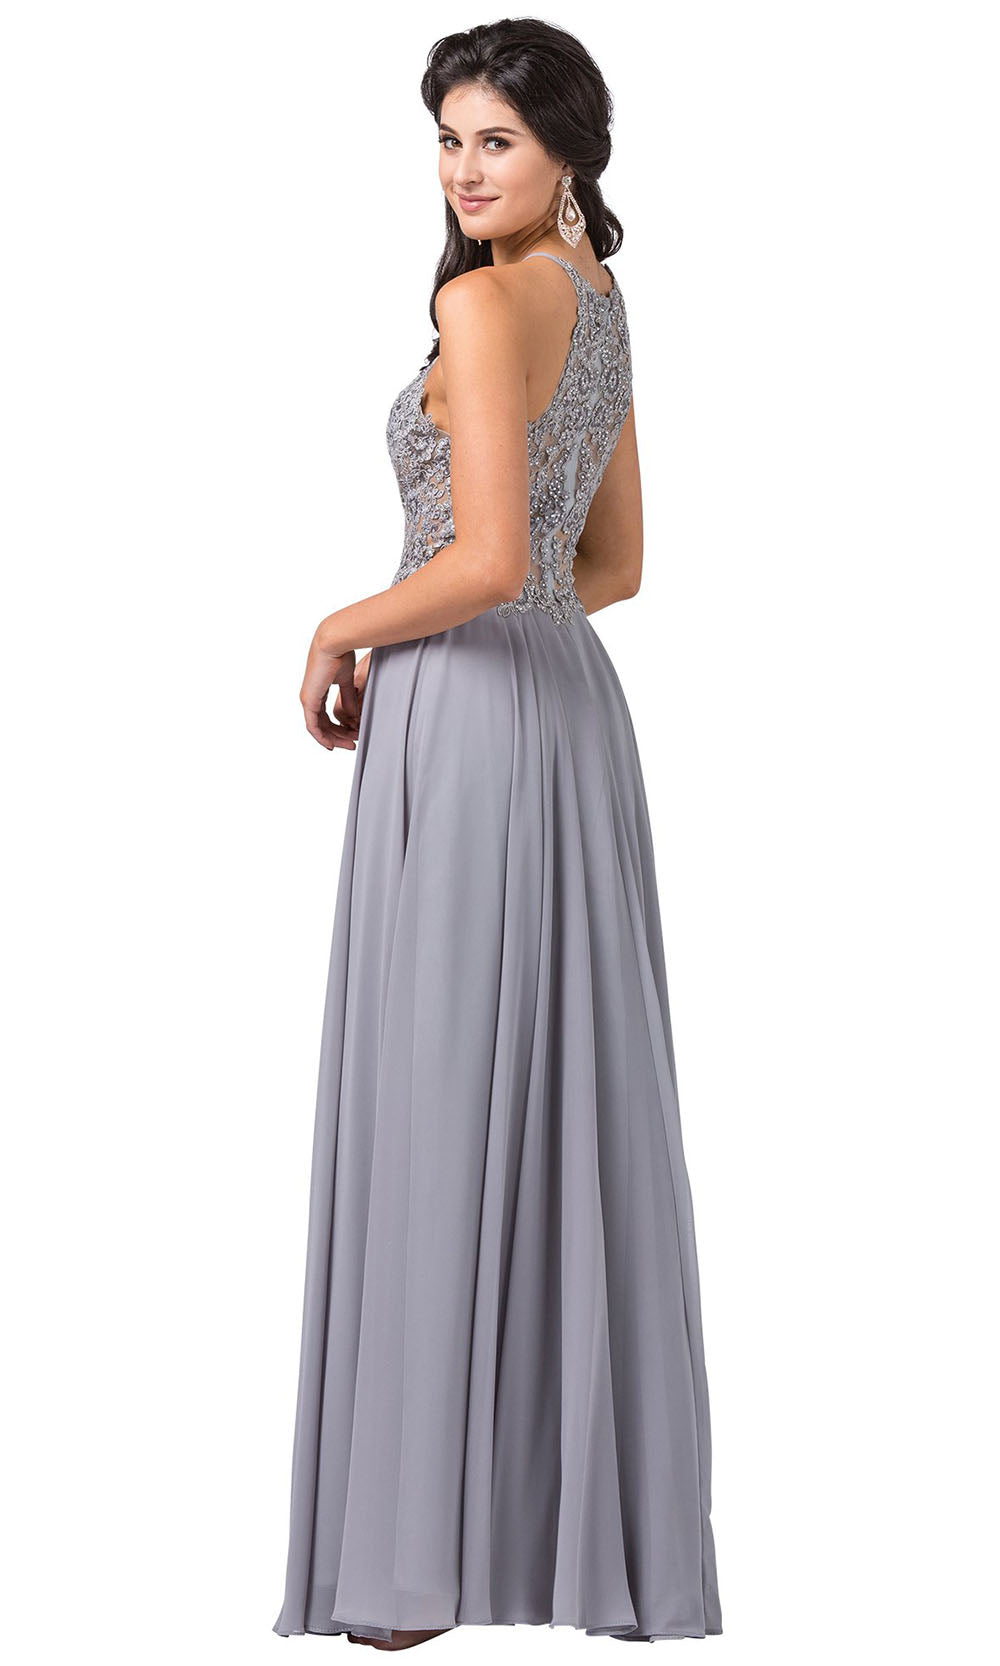 Dancing Queen - 2716 Embroidered Halter A-Line Dress In Silver & Gray